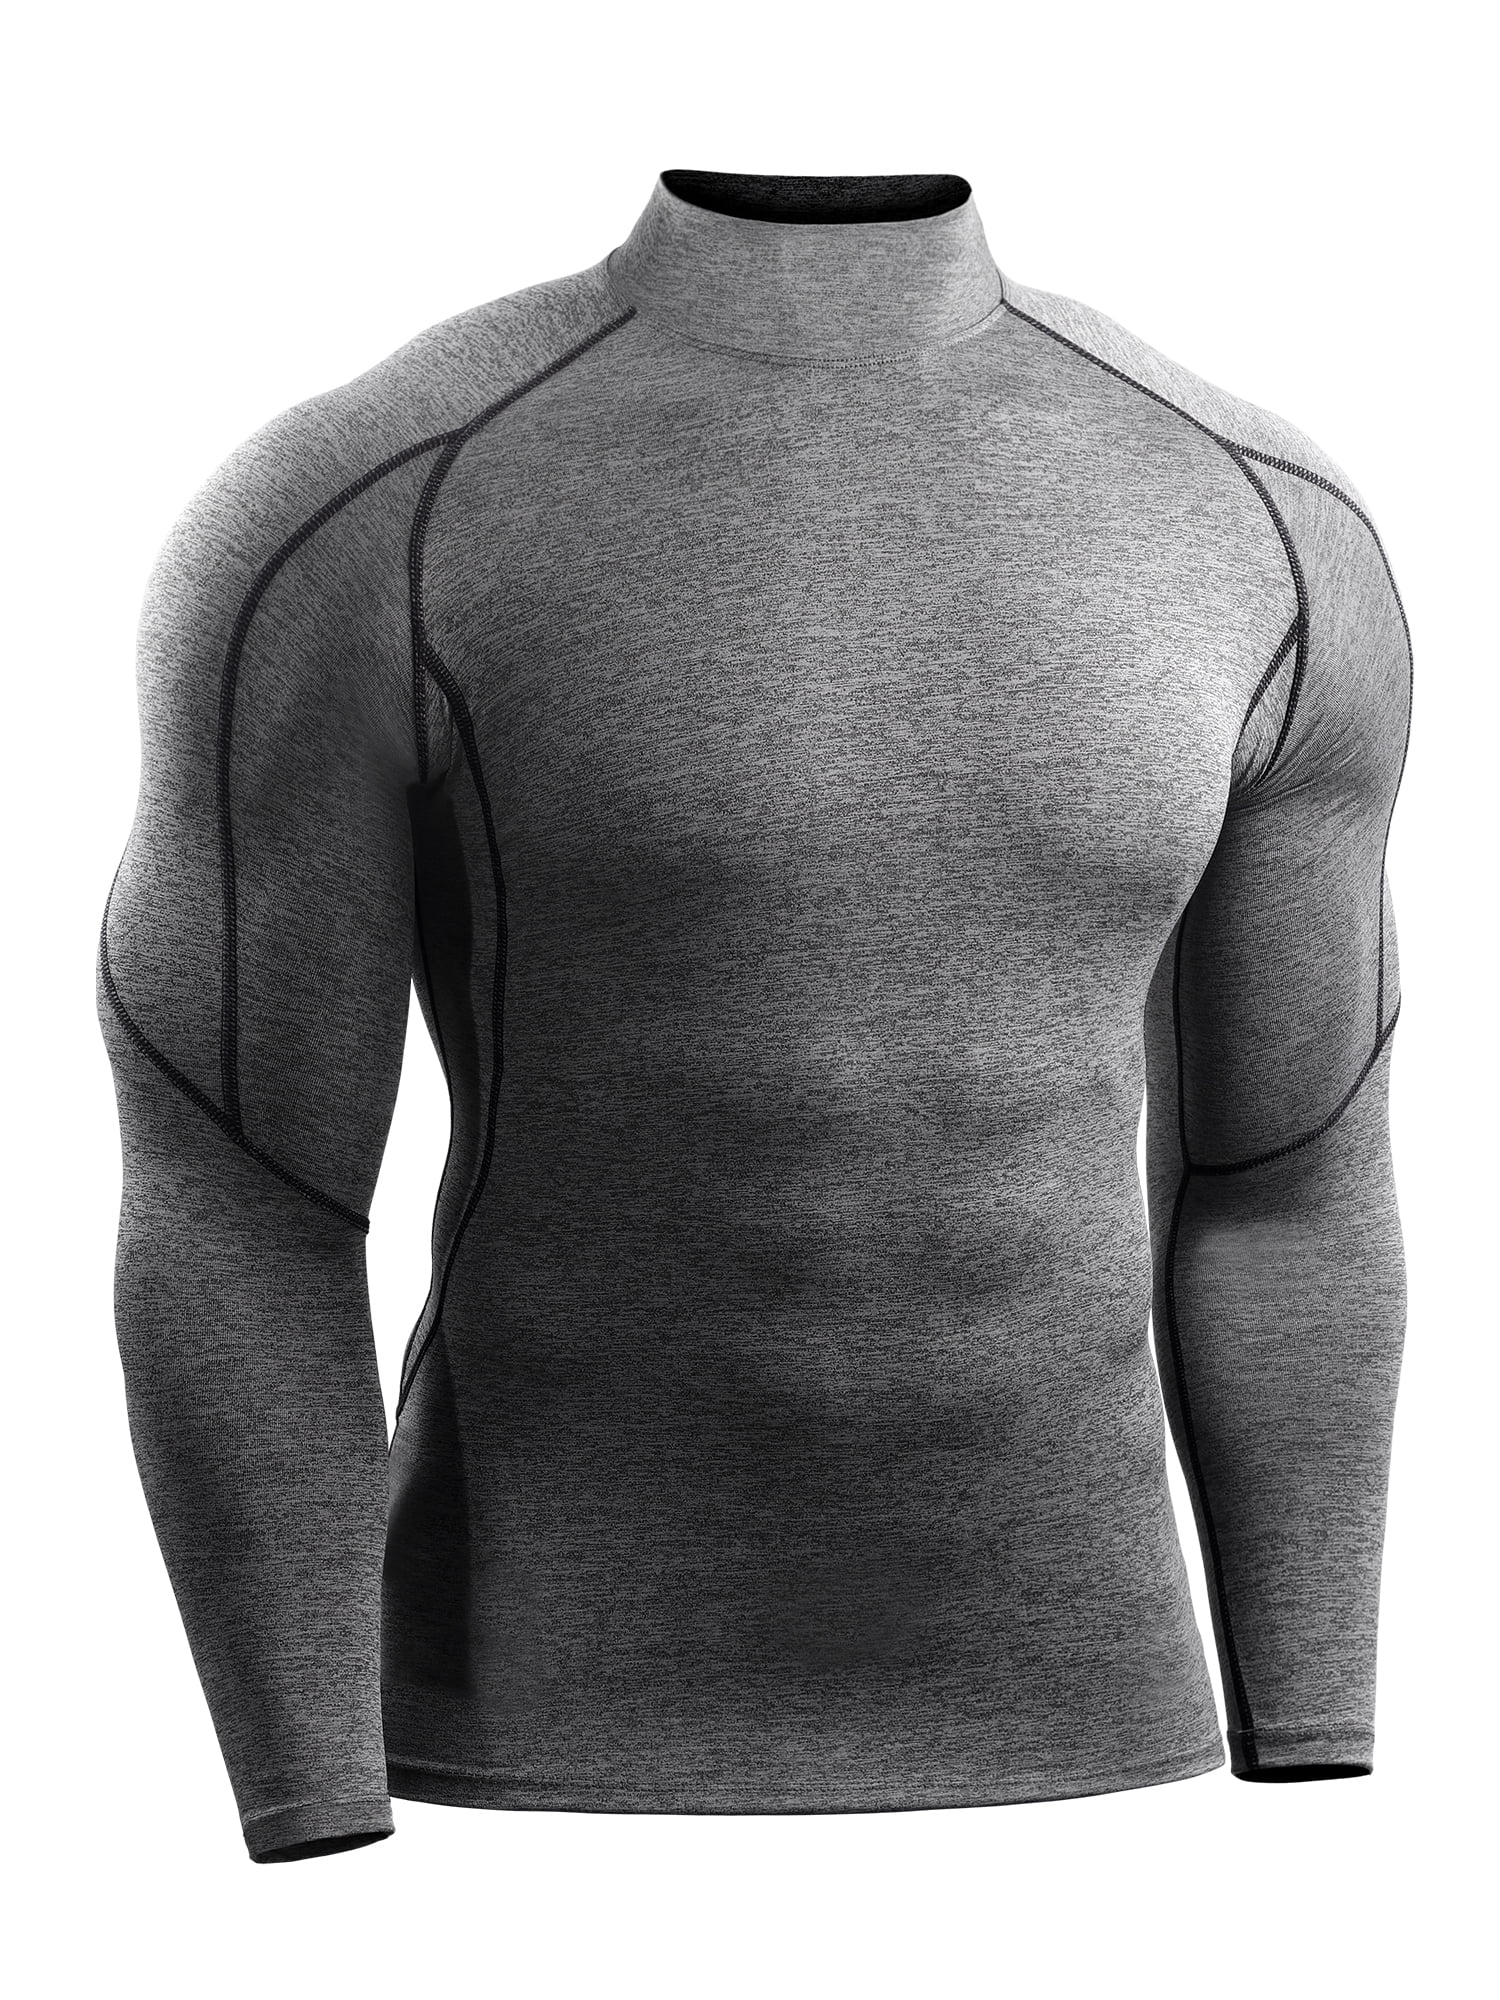 Mens Long Sleeve T-ShirtS Thermal Compression Armour Base Layer Tops Gym Sports 